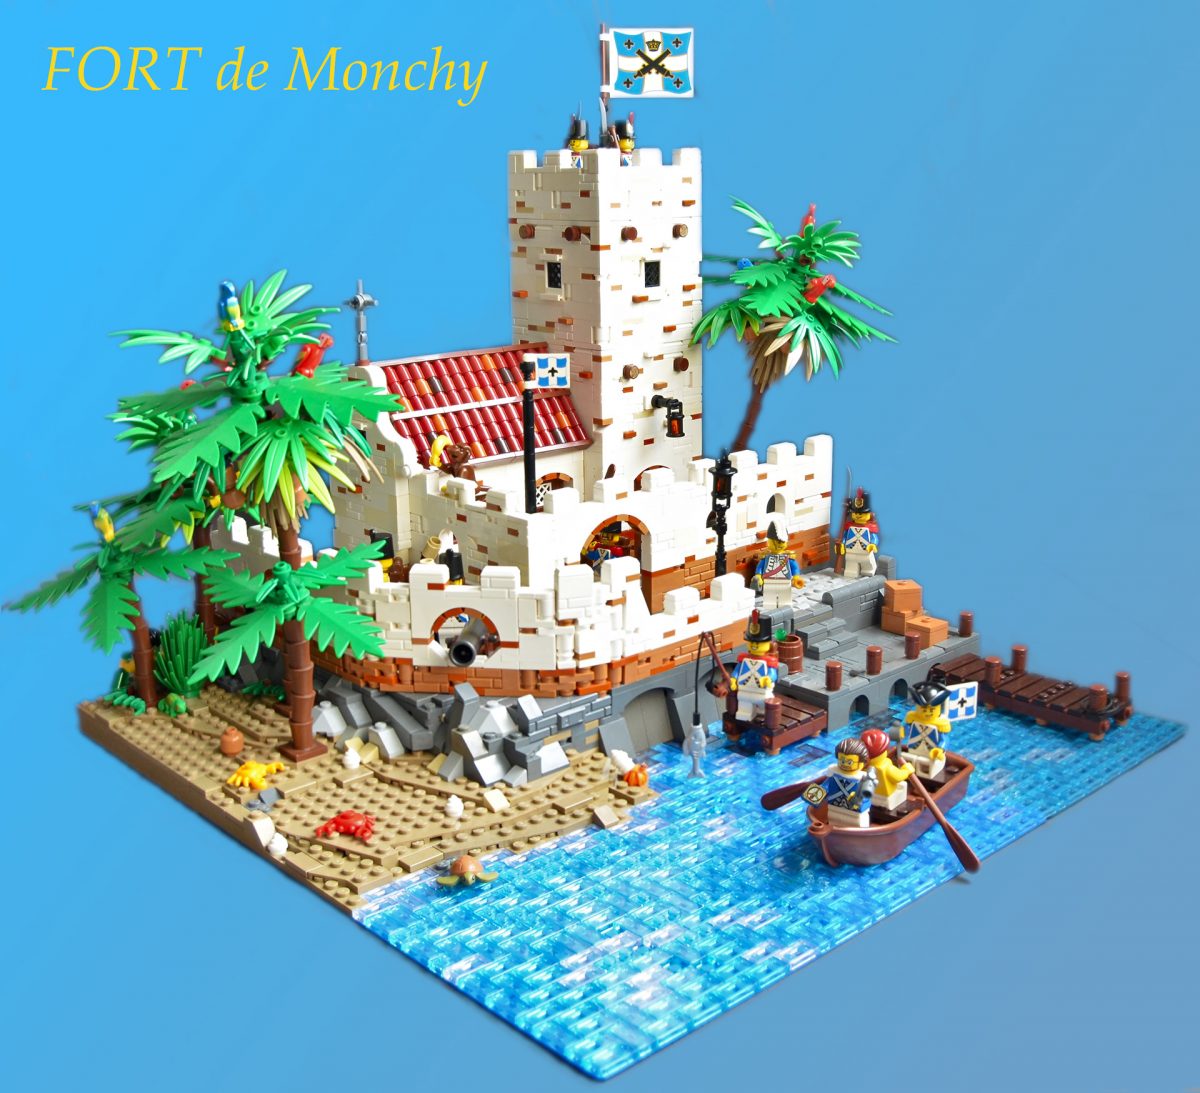 Featured Image for "Fort de Monchy" by The Inventor